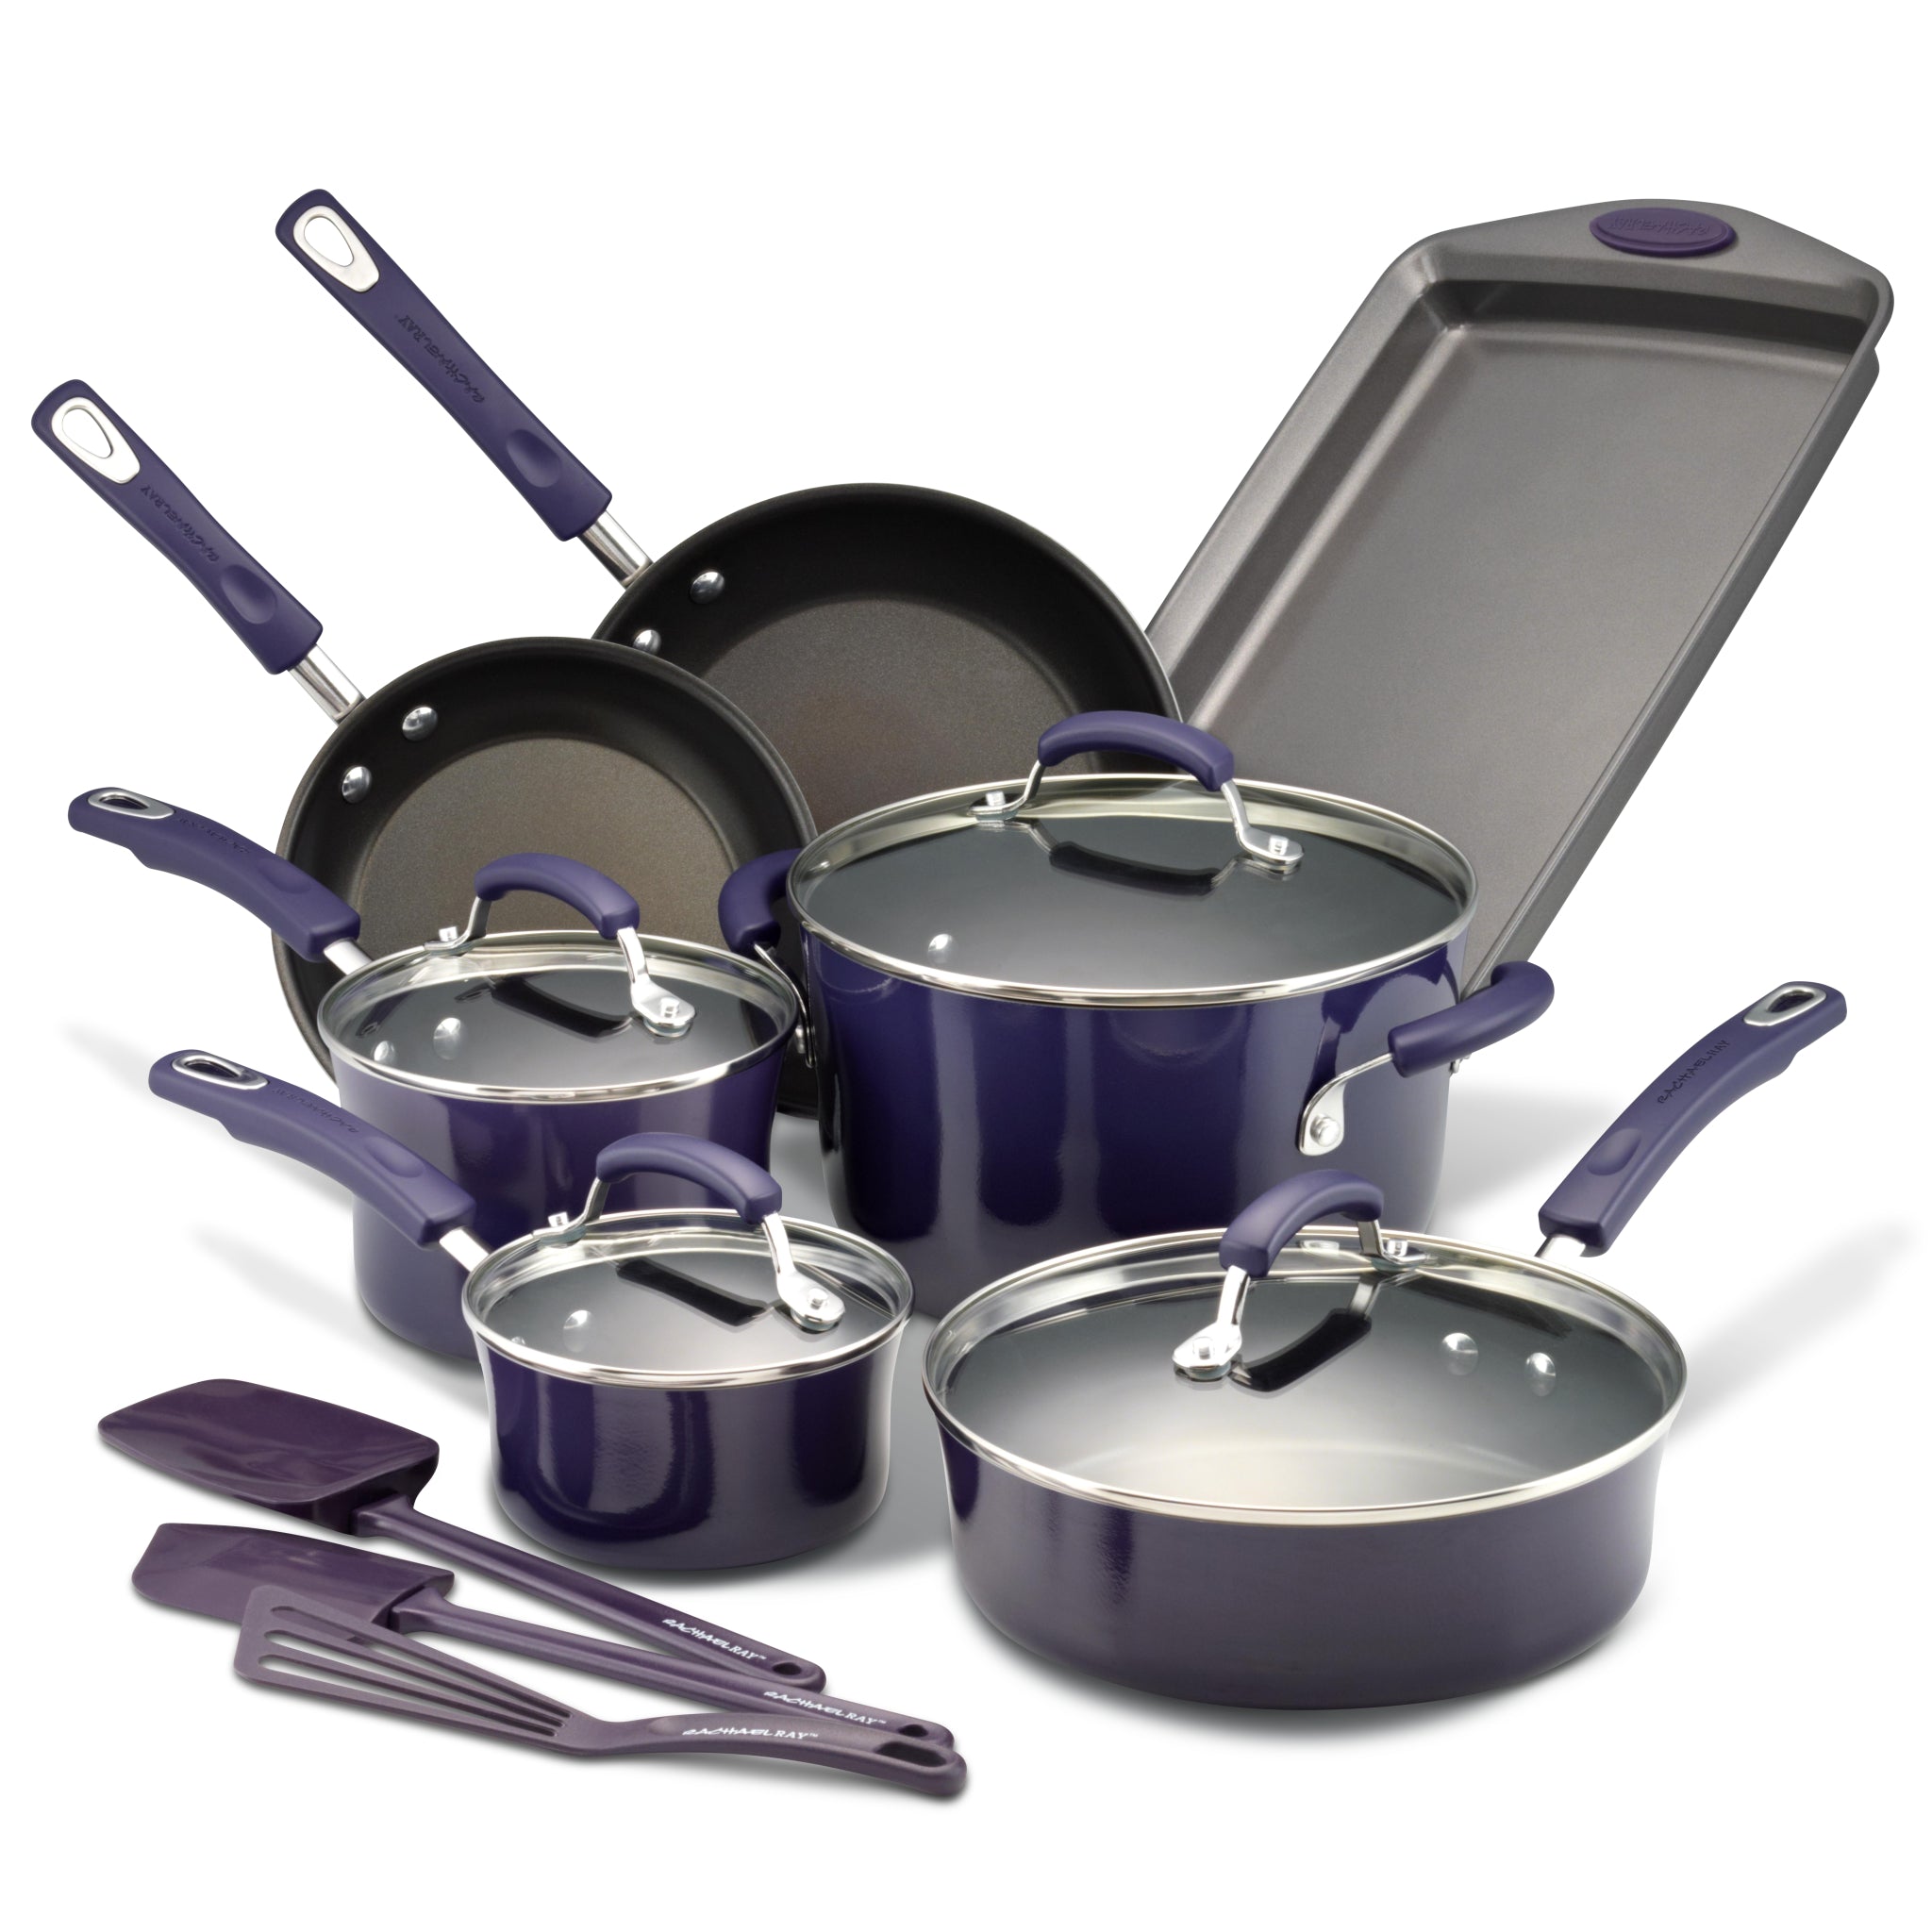 Source Purple color Cookware set 2021 hot selling with non stick frying pan  set and soup pot with cooking pots on m.